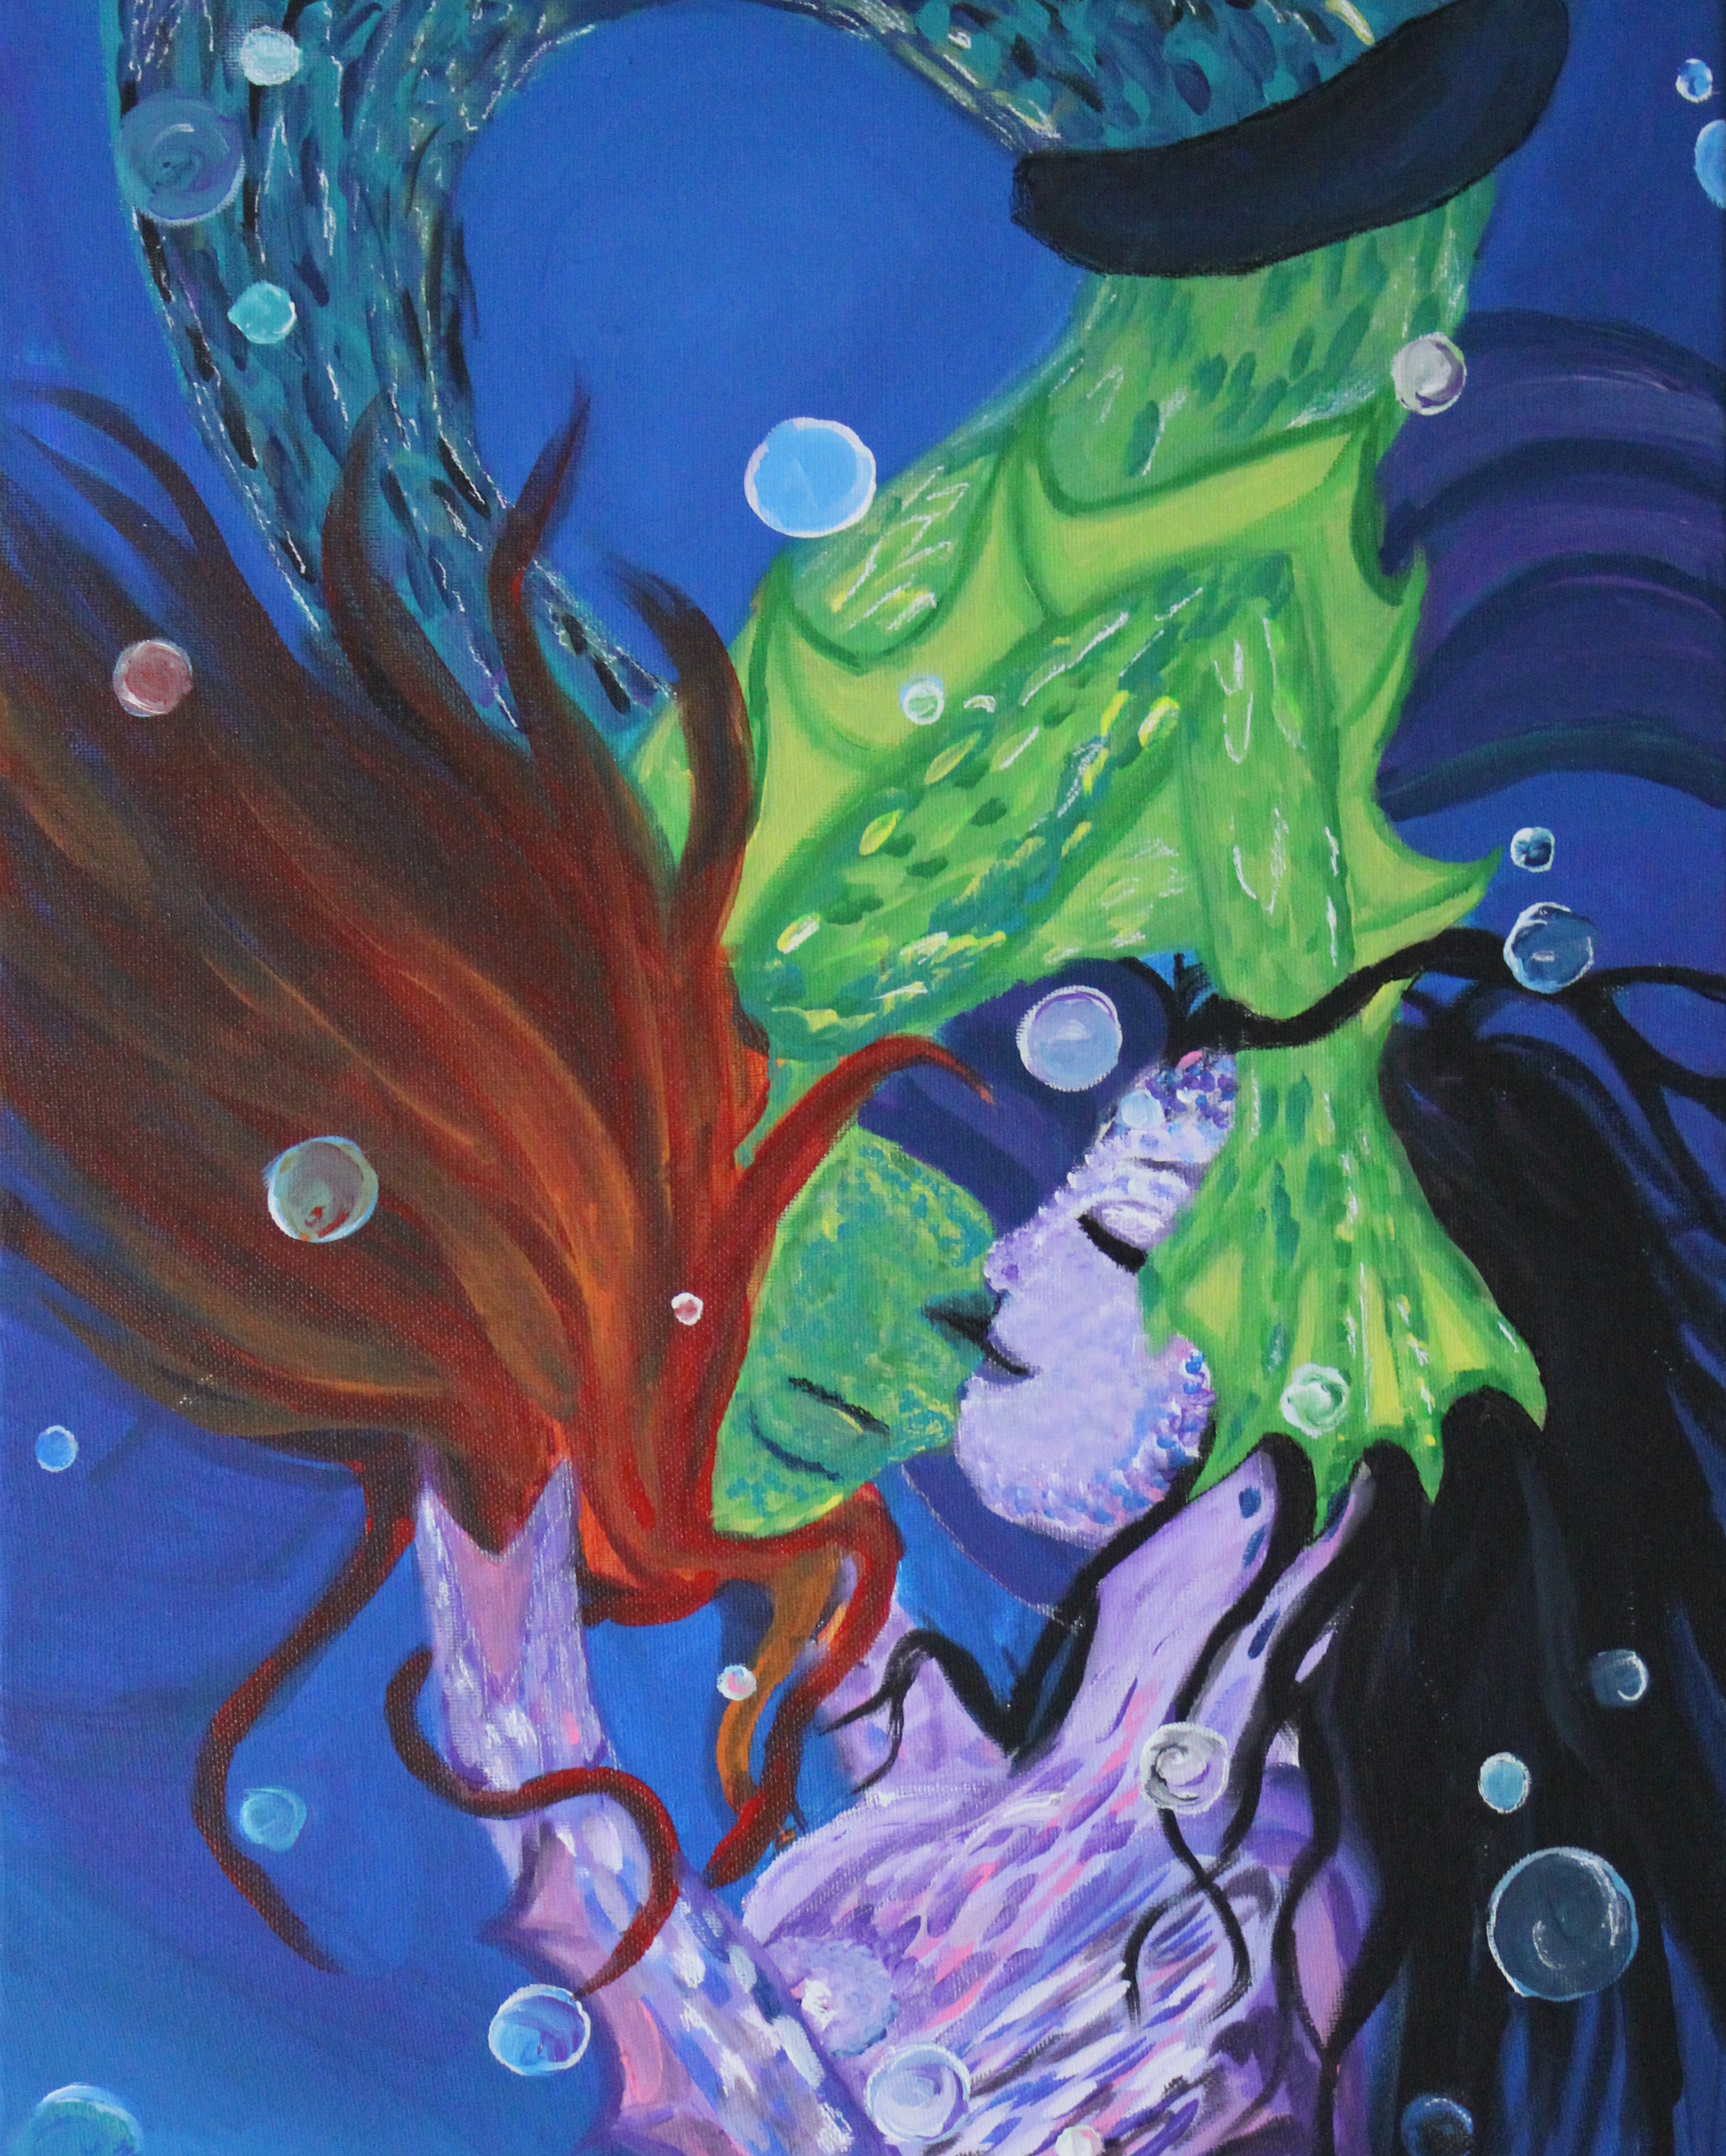 Painting of two brightly colored mermaids kissing underwater.